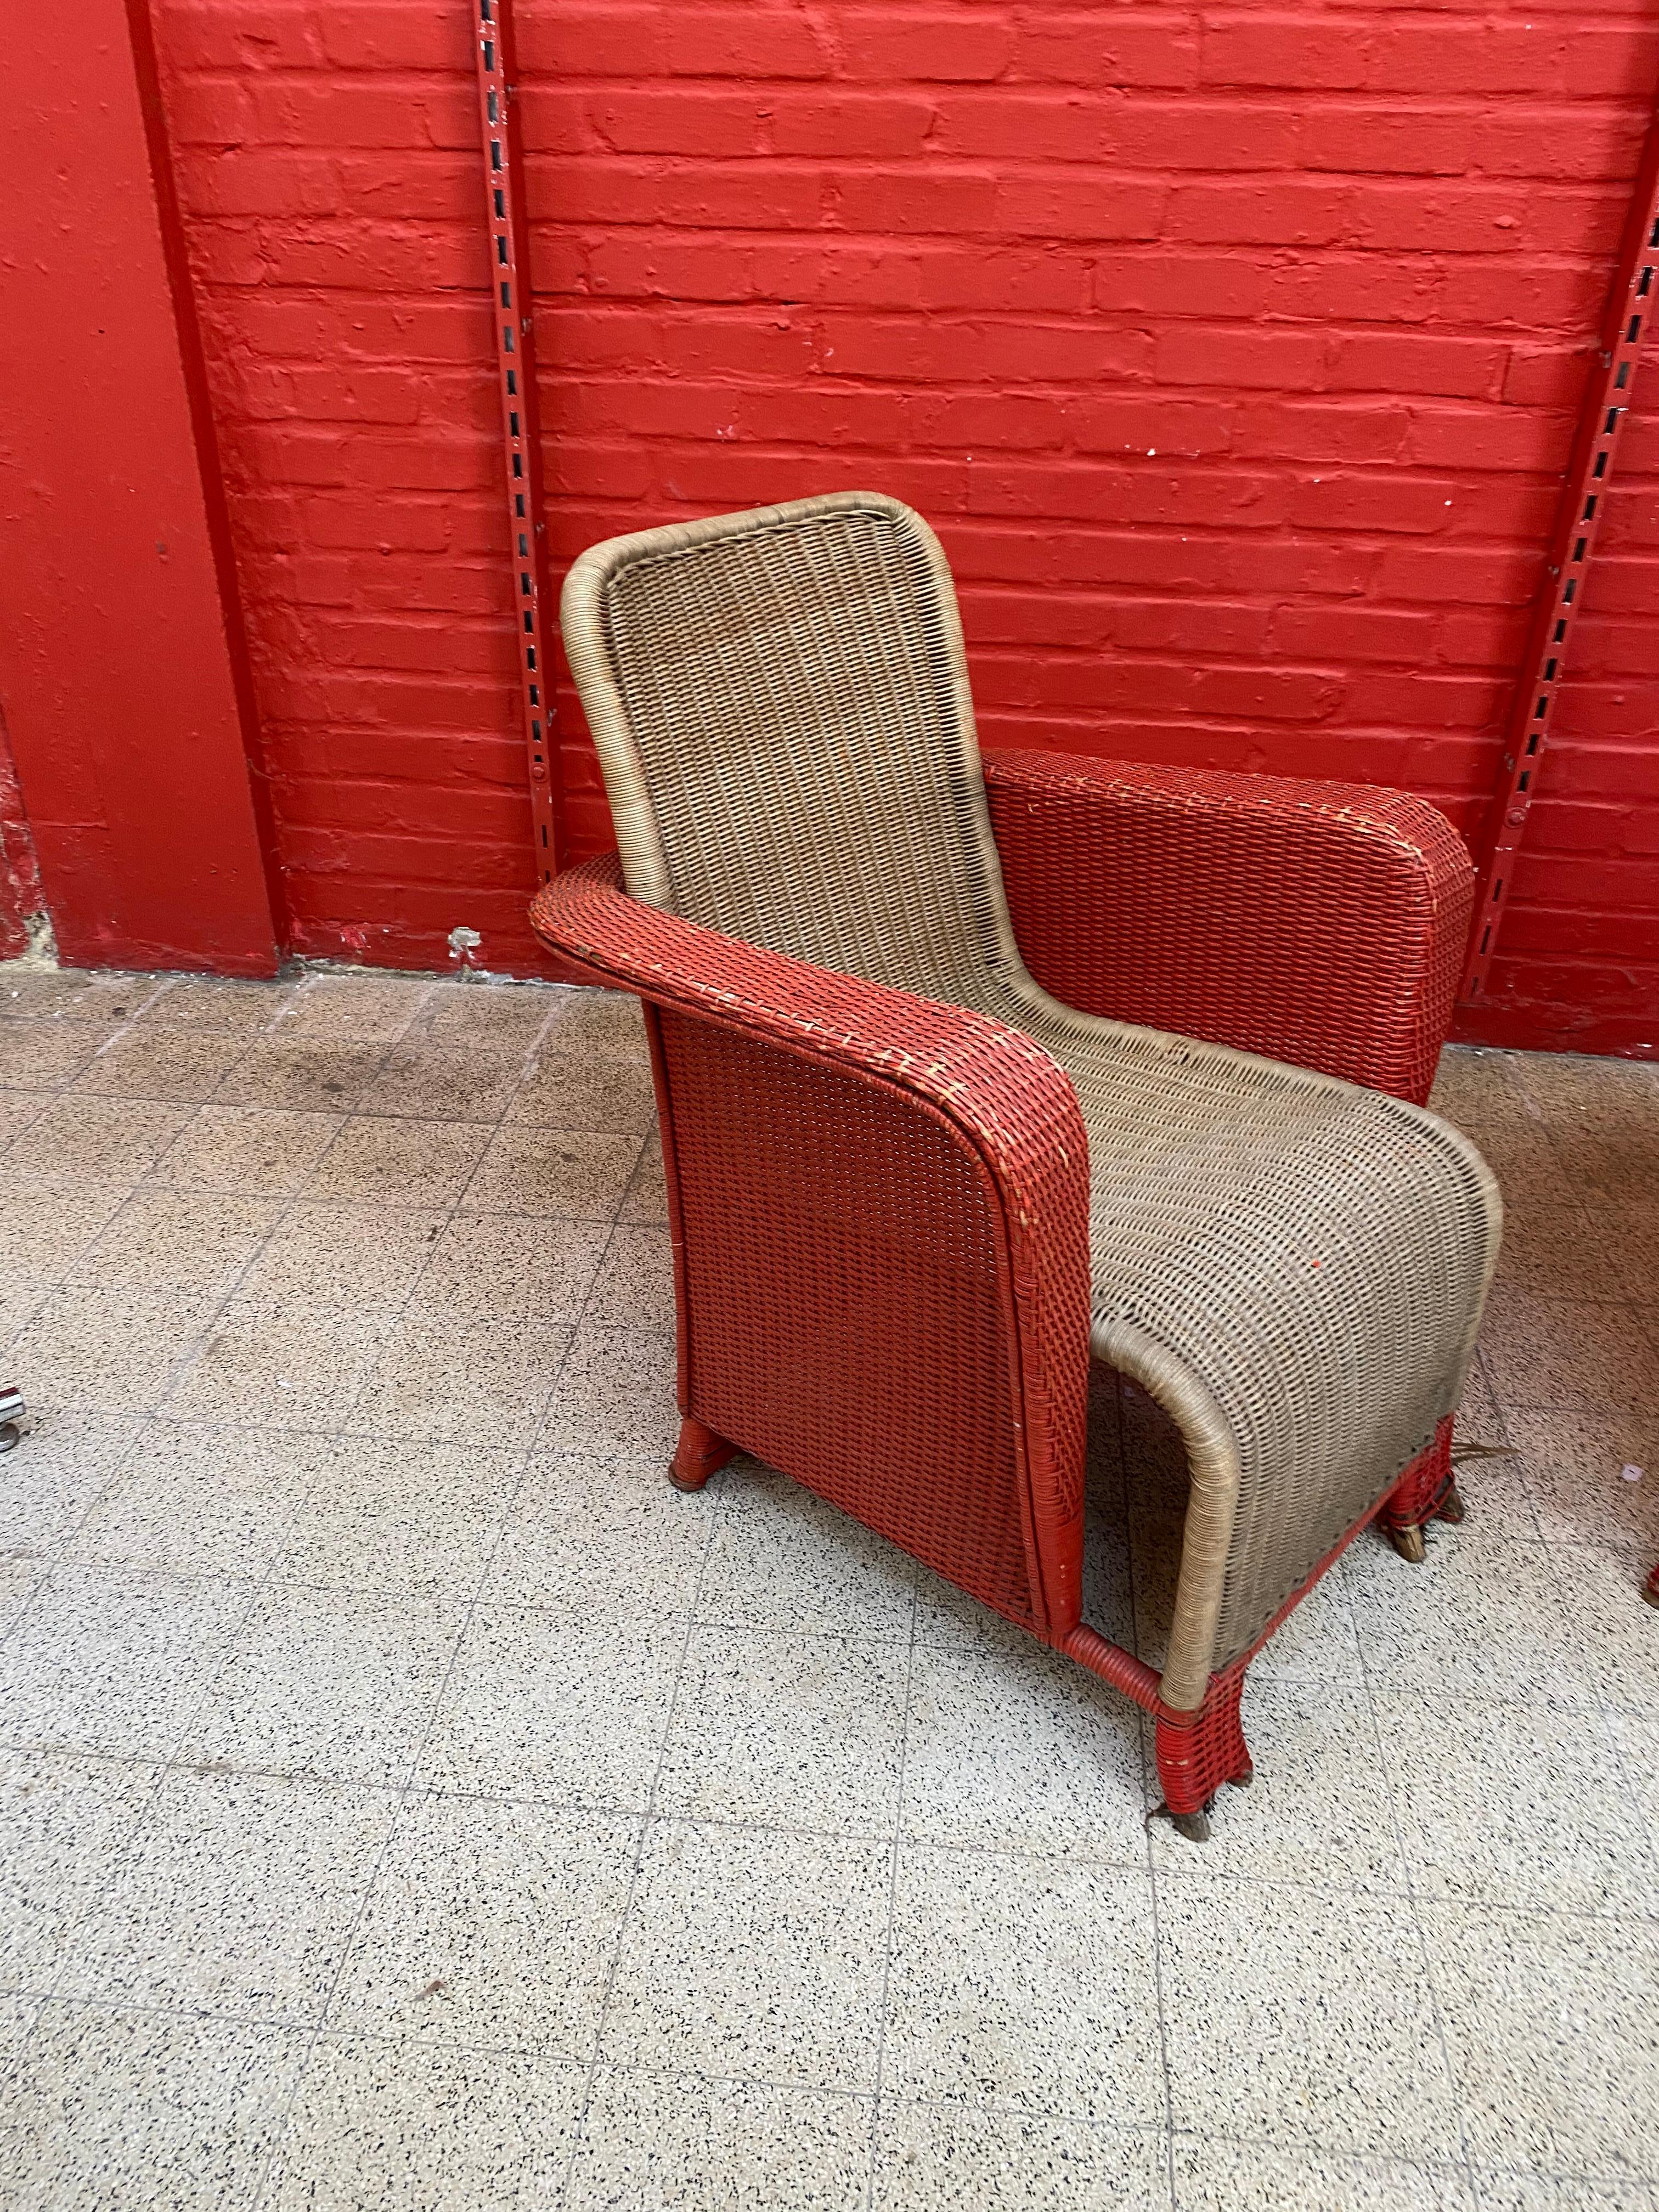 Pair of Art Deco rattan armchairs, circa 1930
good general condition, small problems with the rottin on the feet.